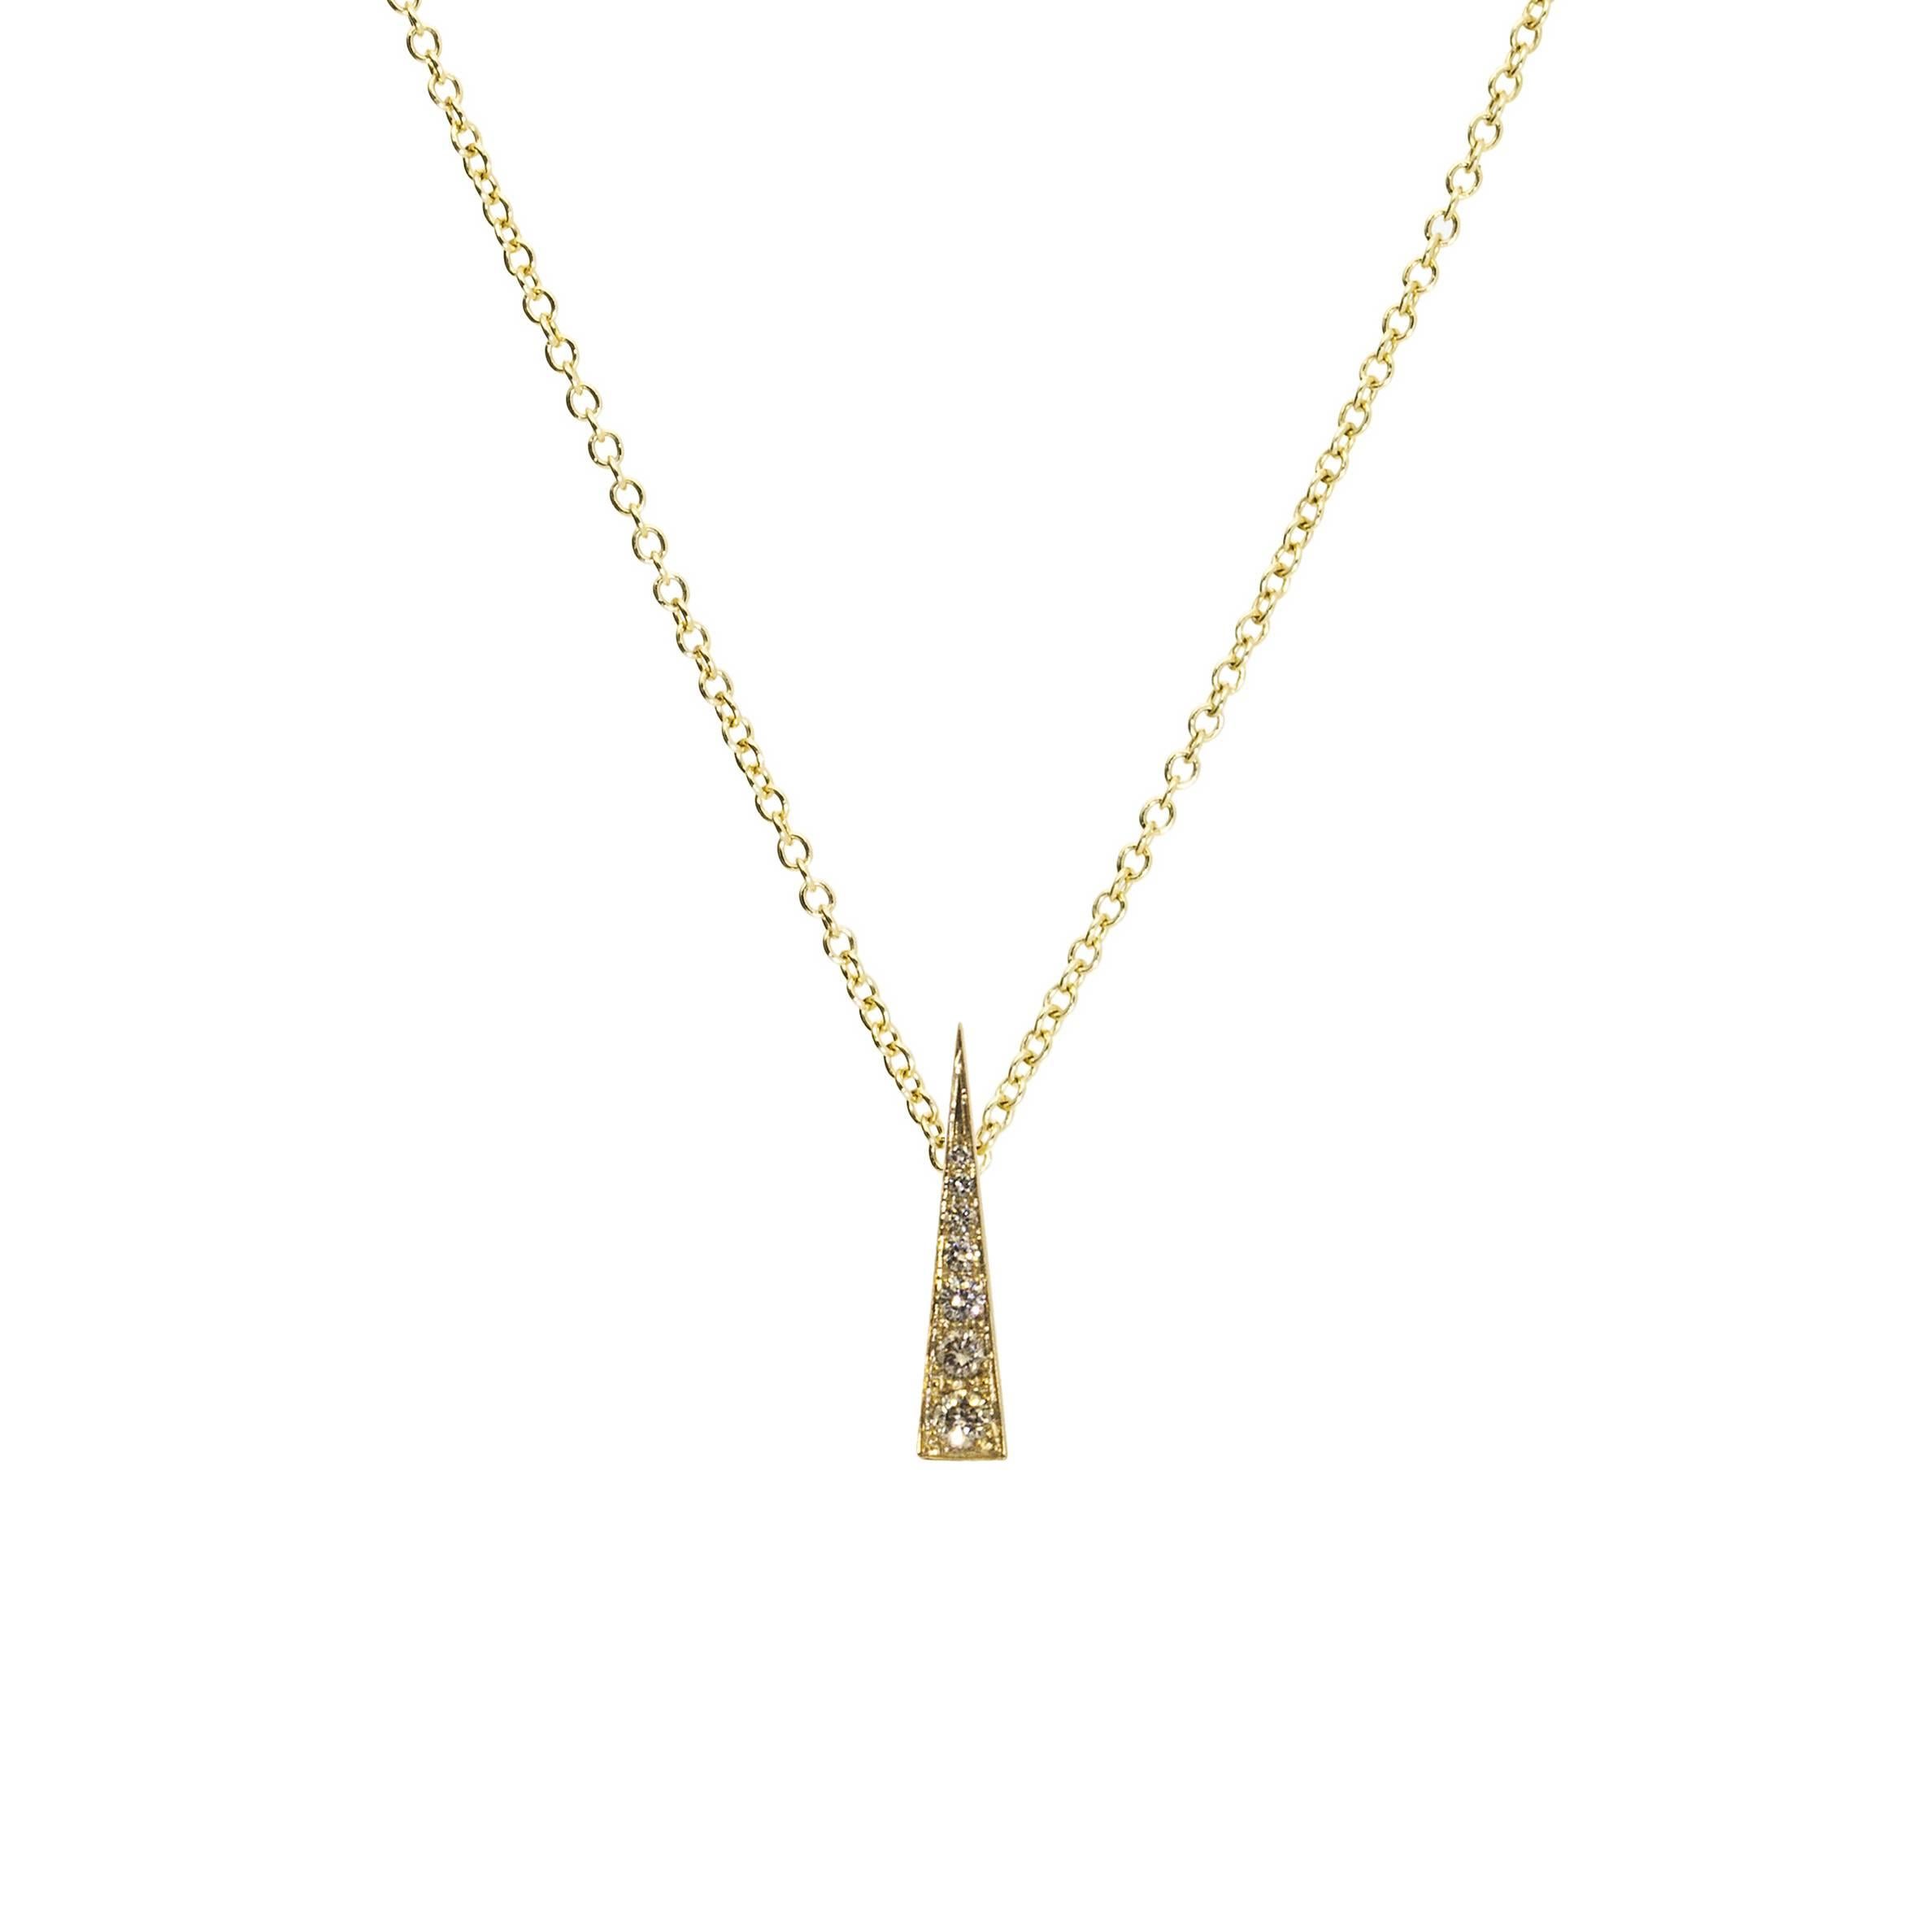 Daou Spark Convertible Pendant Necklace in Diamond and Yellow Gold